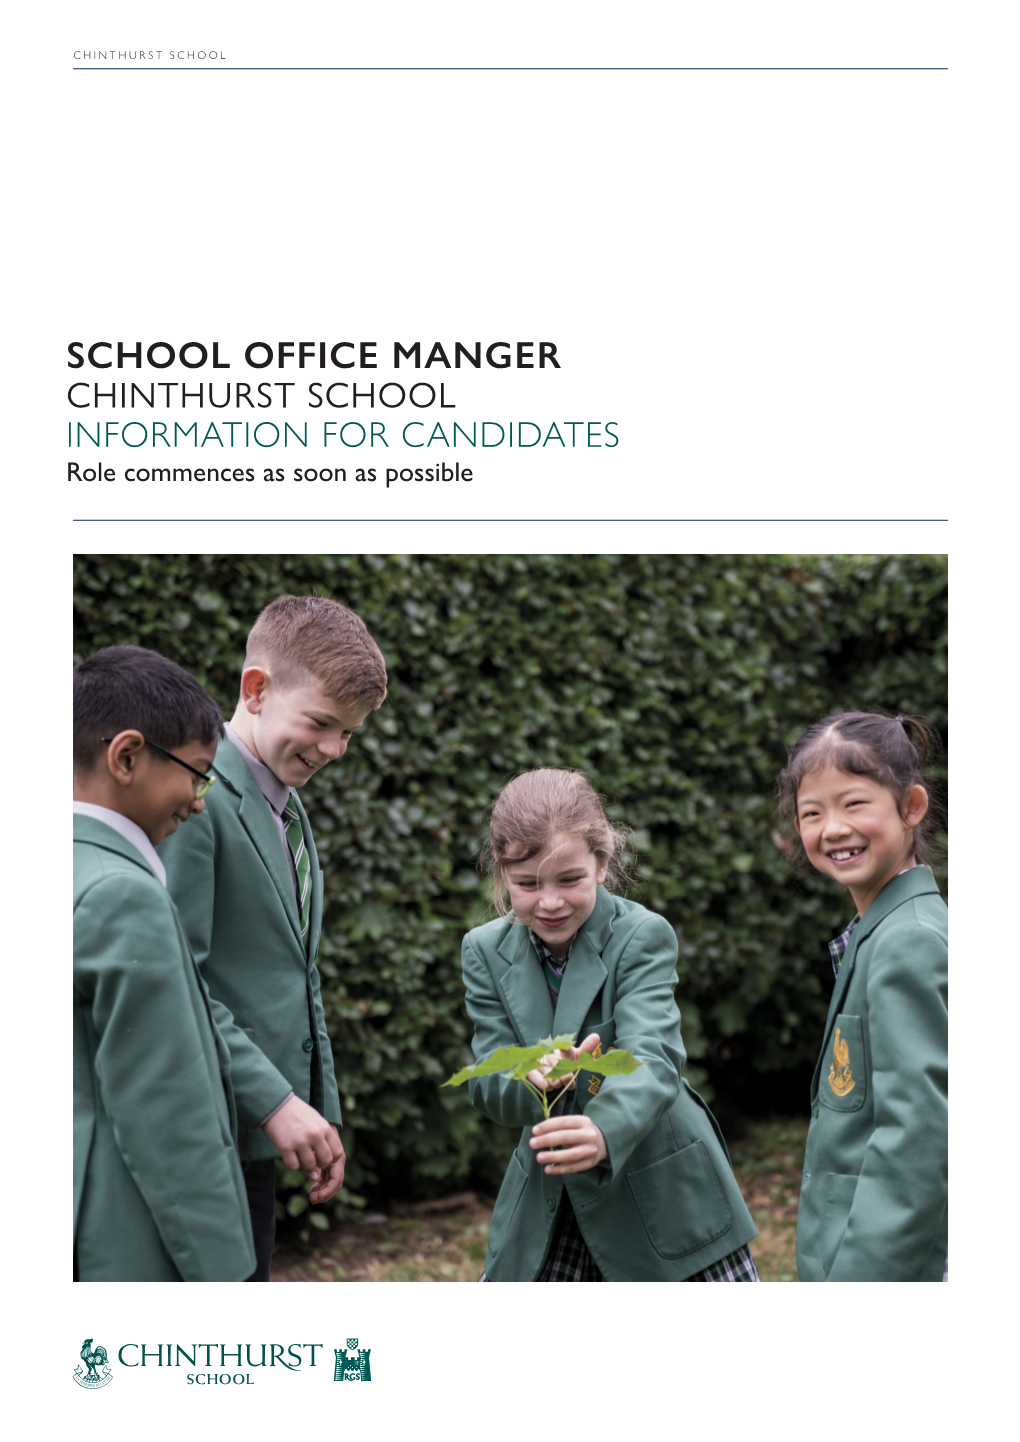 SCHOOL OFFICE MANGER CHINTHURST SCHOOL INFORMATION for CANDIDATES Role Commences As Soon As Possible CHINTHURST SCHOOL